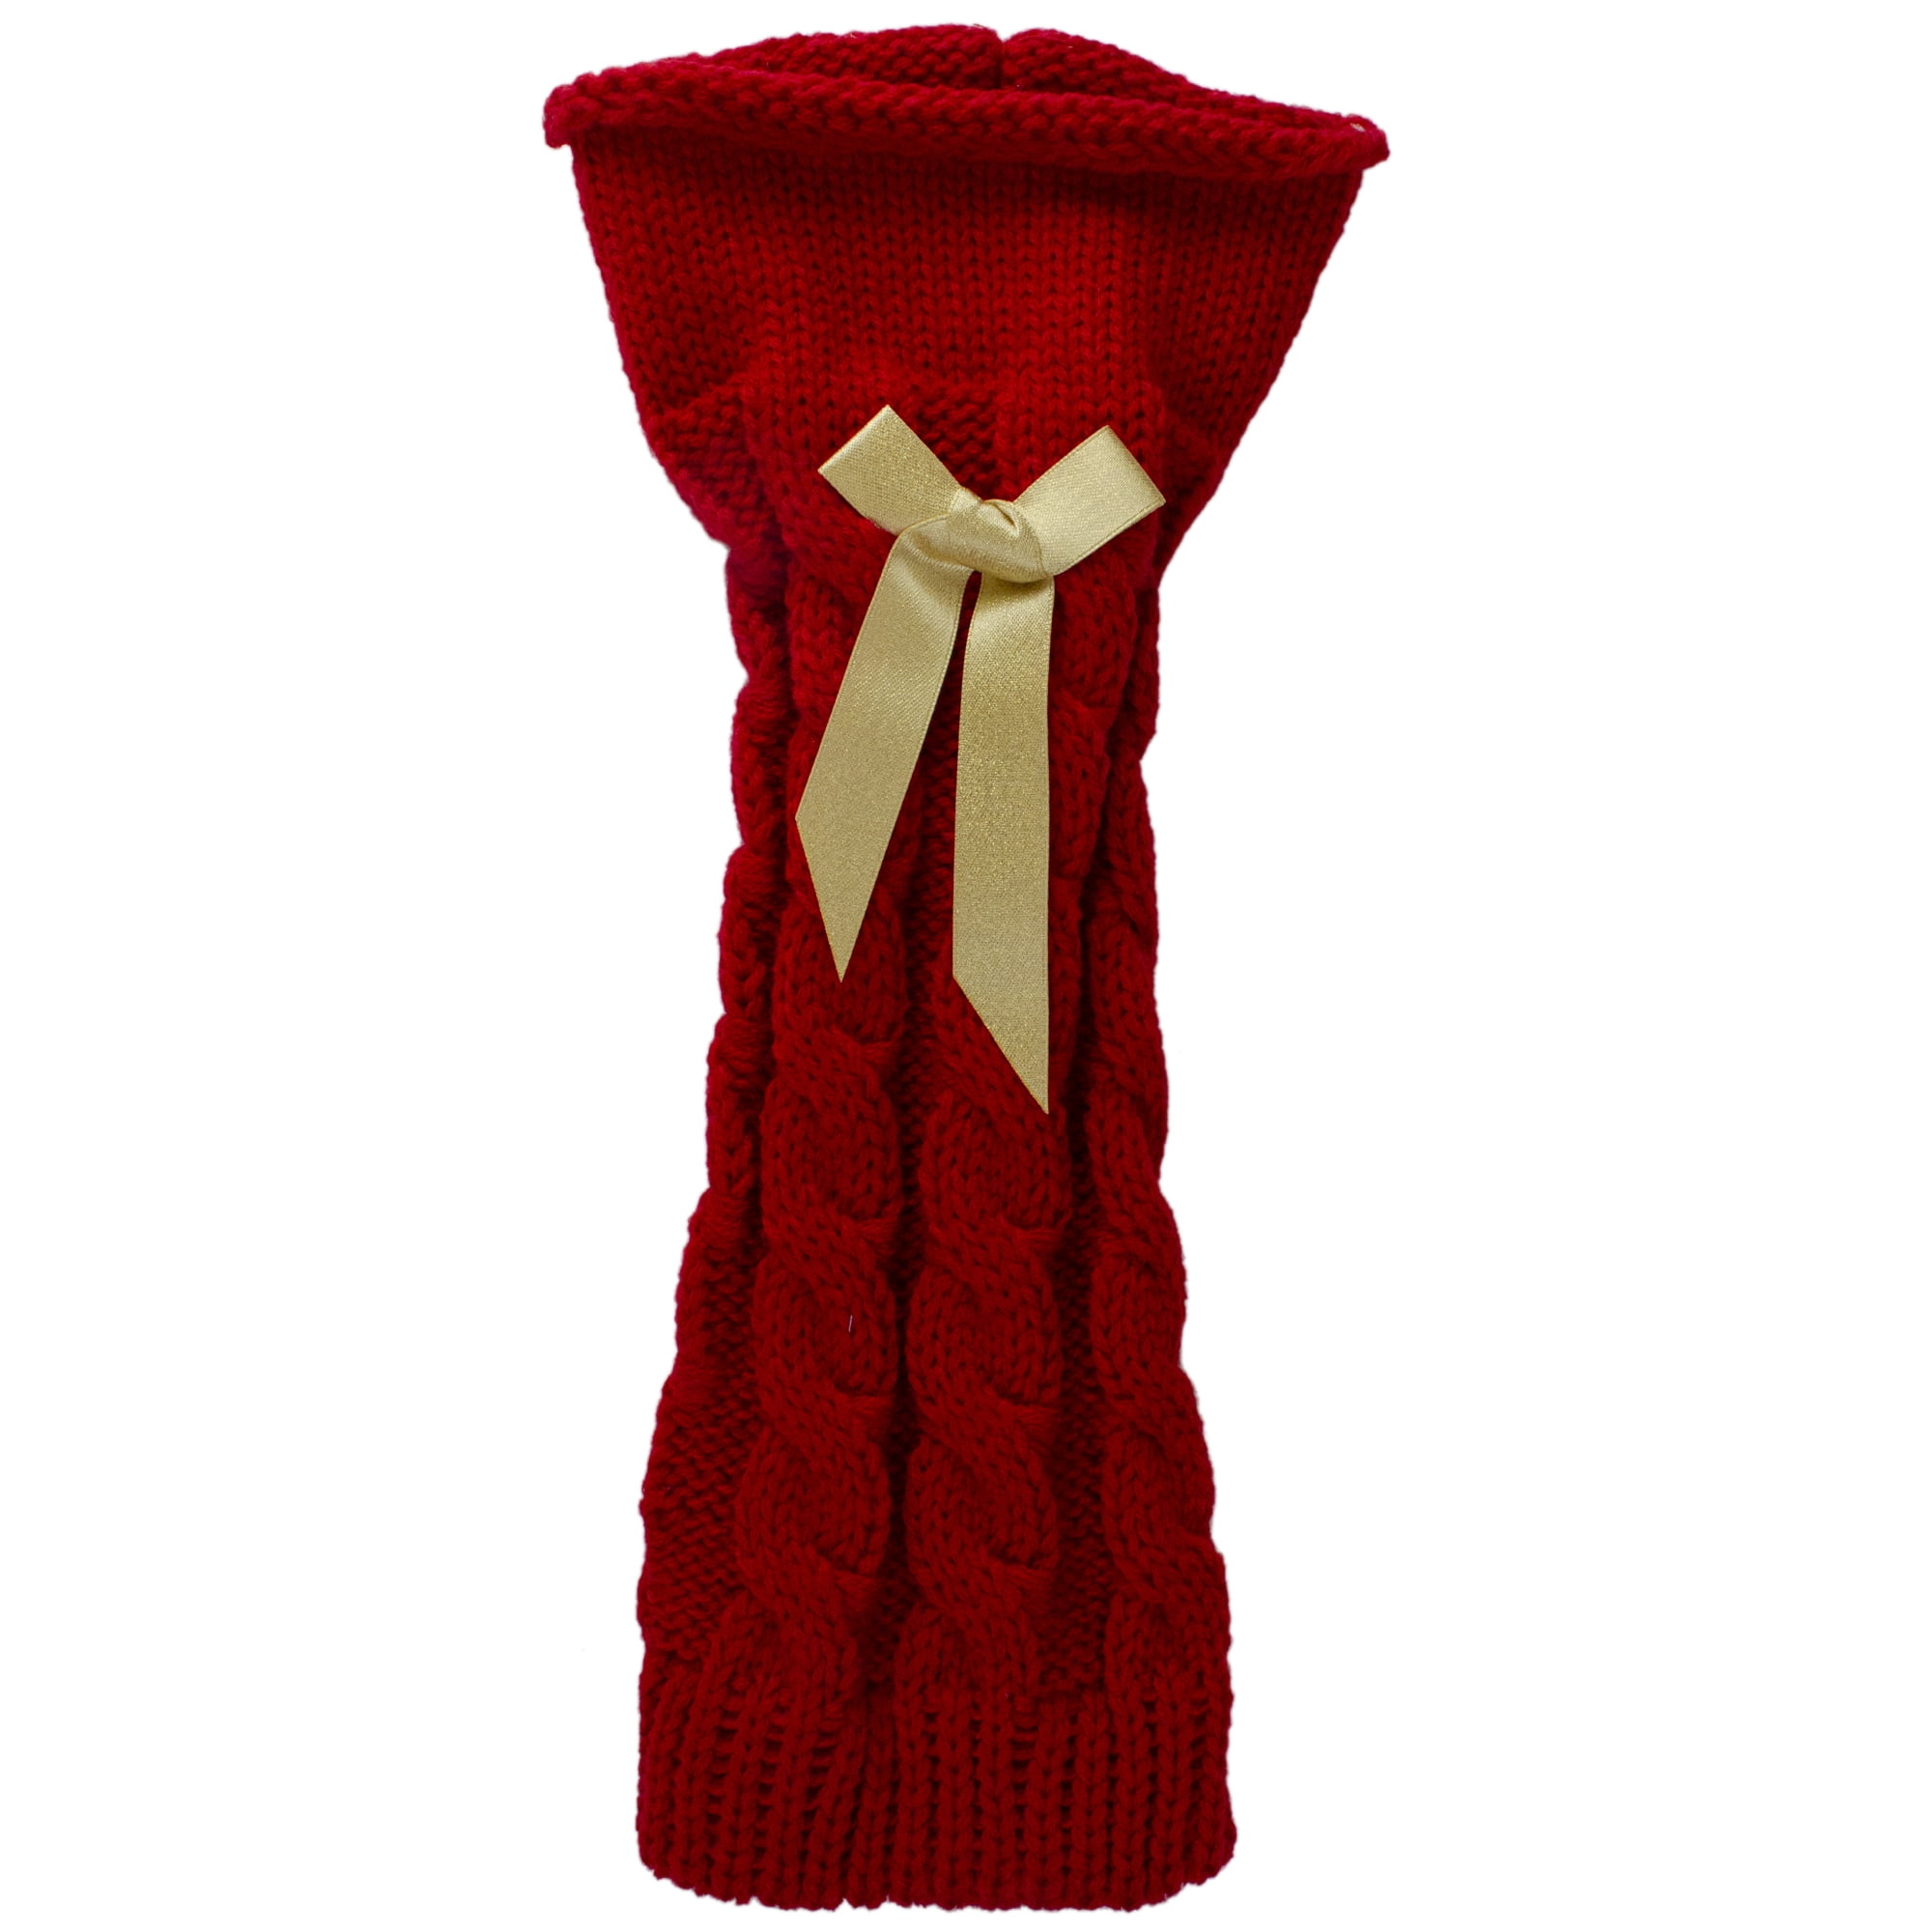 Crimson and Gold Knit Bottle Sweater